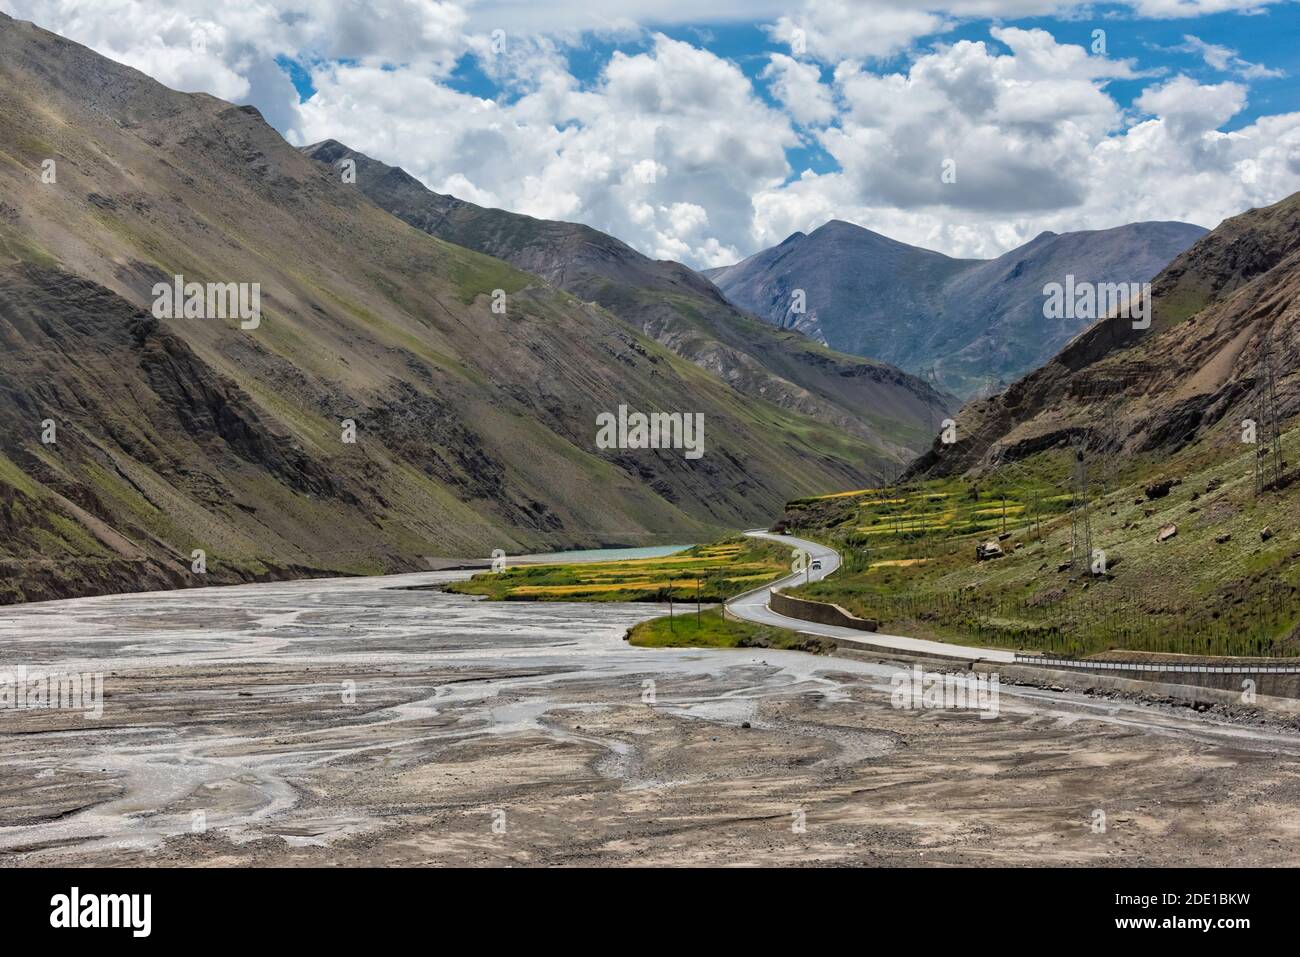 Barley field and glacial river in the mountain, Gyantse County, Tibet, China Stock Photo